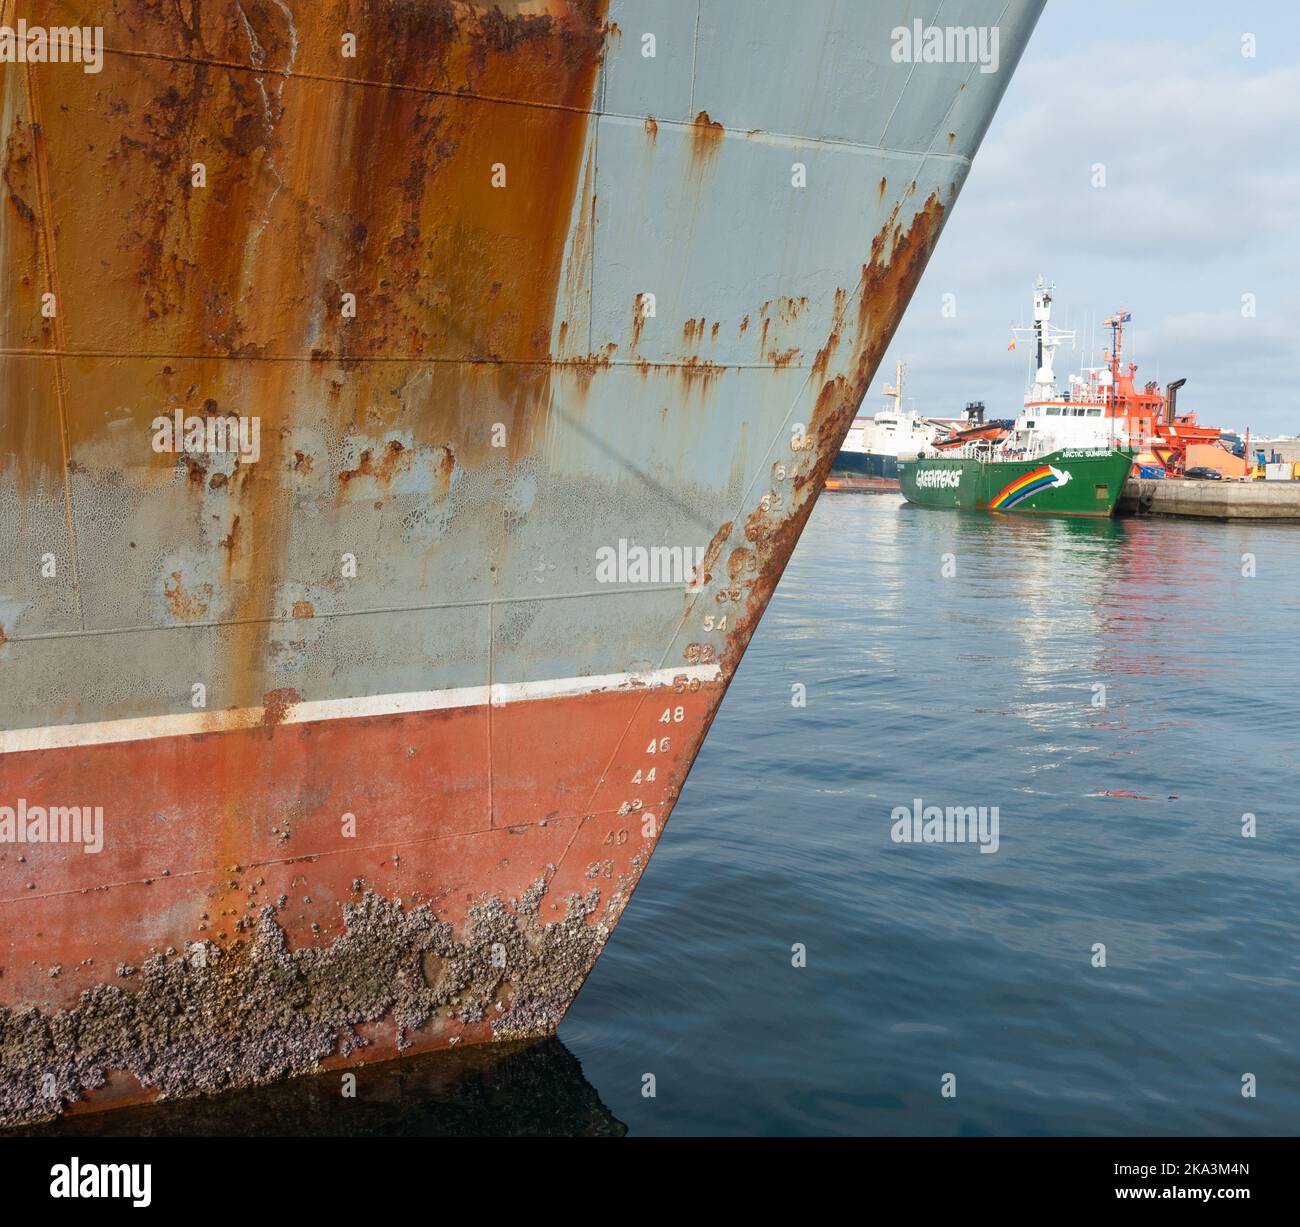 Rusting Russian trawler with Greenpeace ship, Arctic Sunrise in distance. Stock Photo